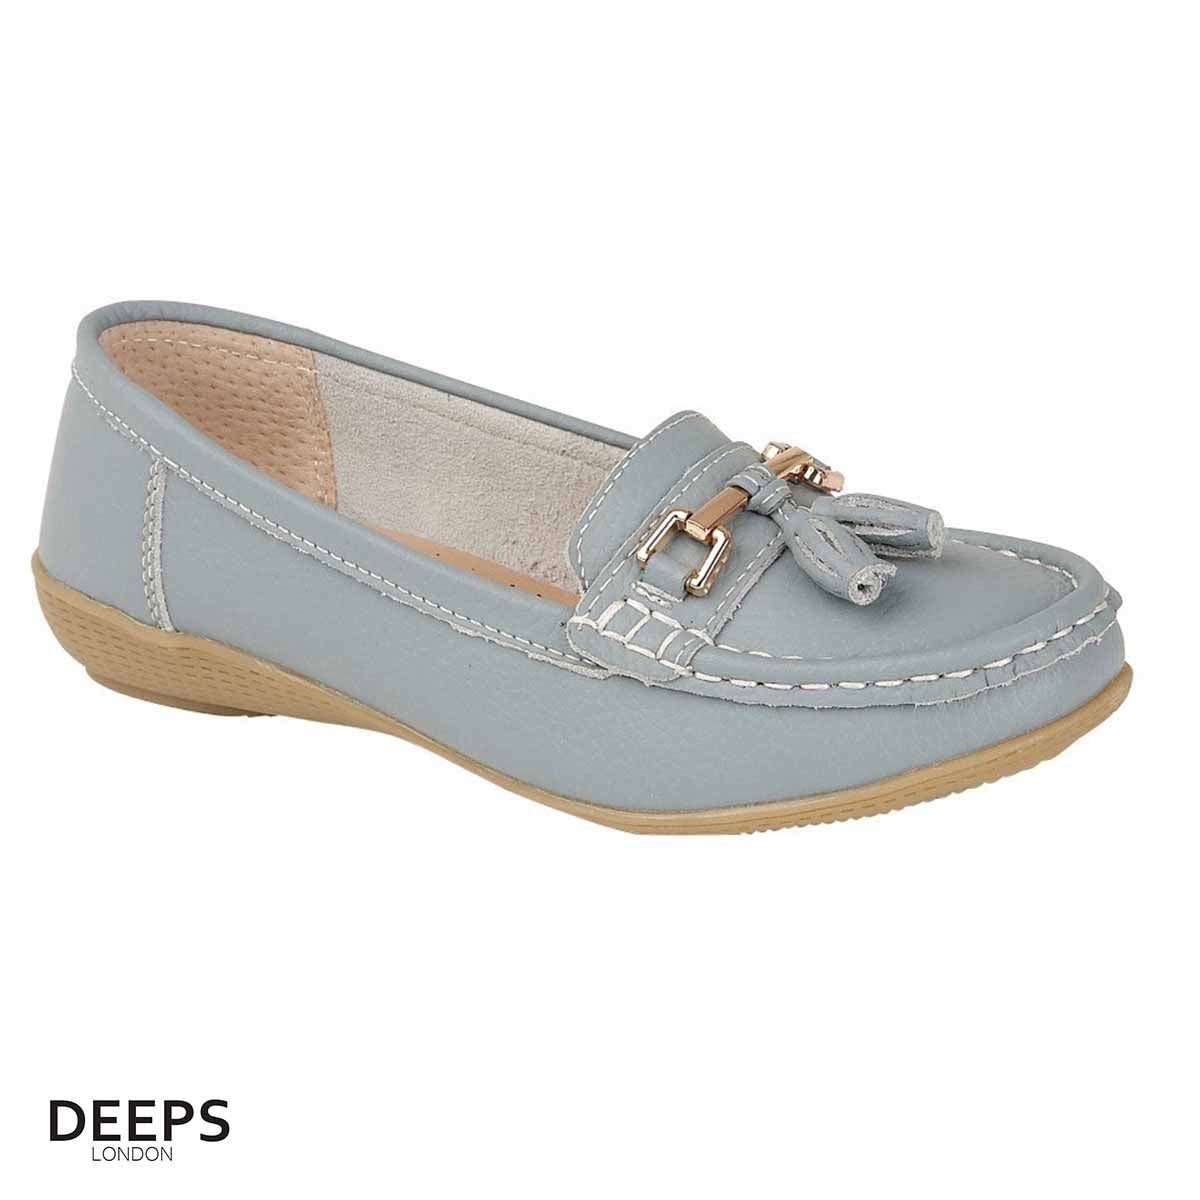 NAUTICAL WOMEN'S SLIP ON CASUAL LEATHER LOAFER/MOCASSIN/BOAT SHOES WITH TASSELS